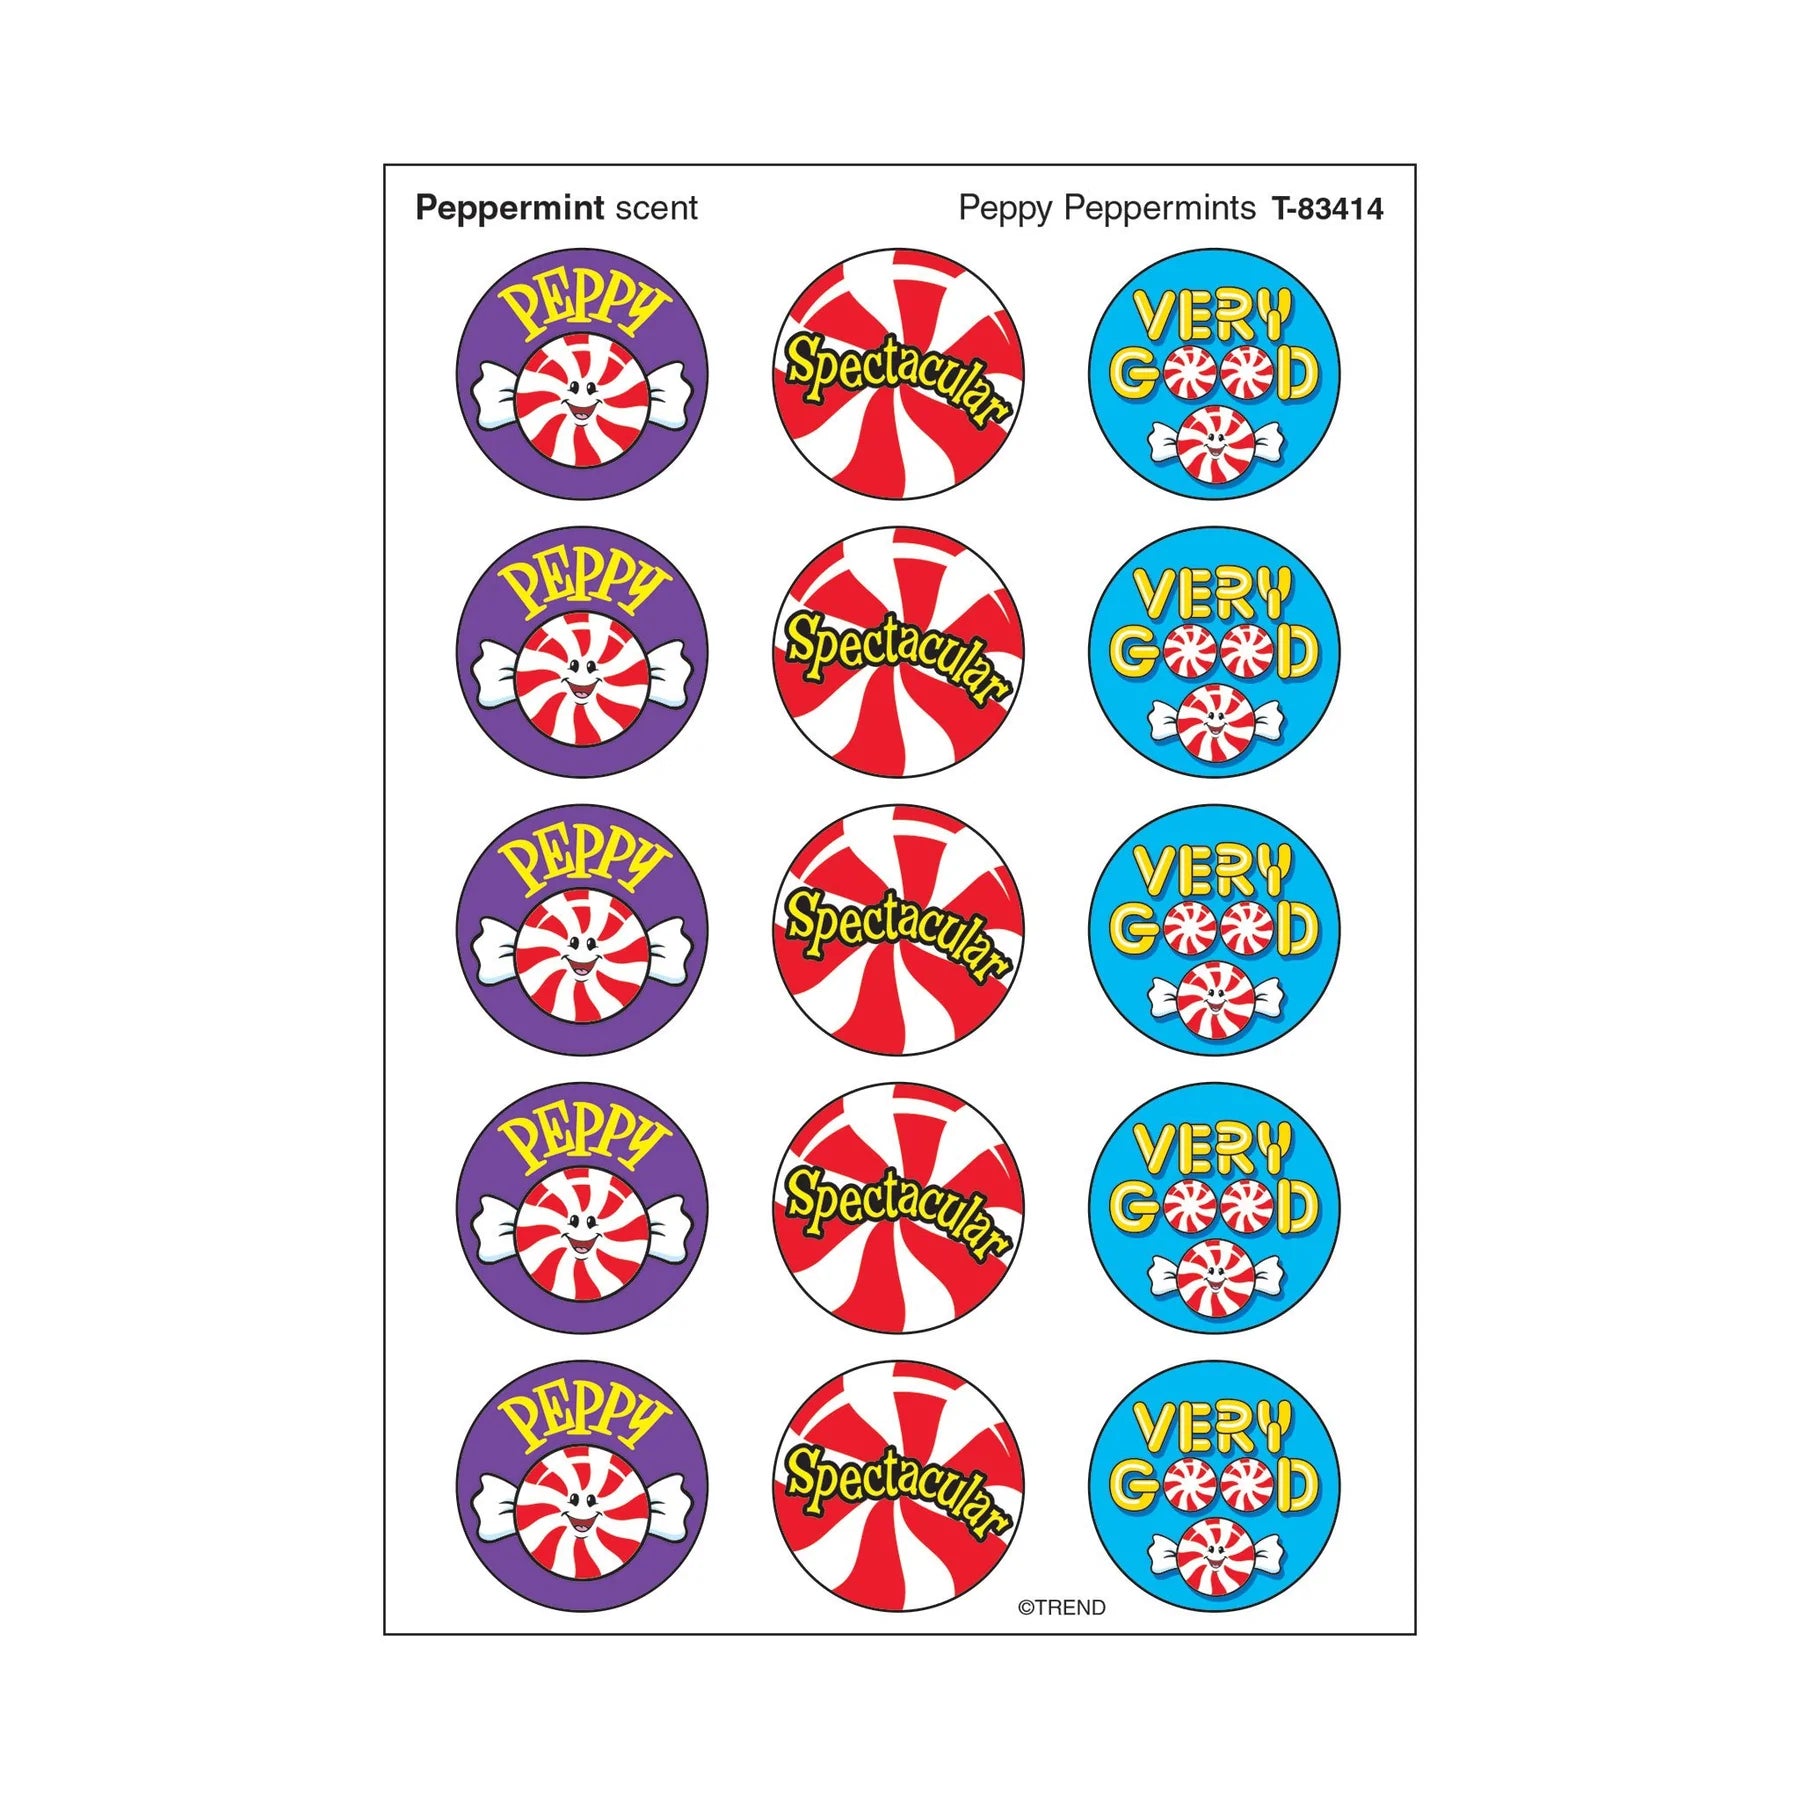 Trend Peppy Peppermints, Peppermint scent Scratch 'n Sniff Stinky Stickers® – Large Round (T-83414)